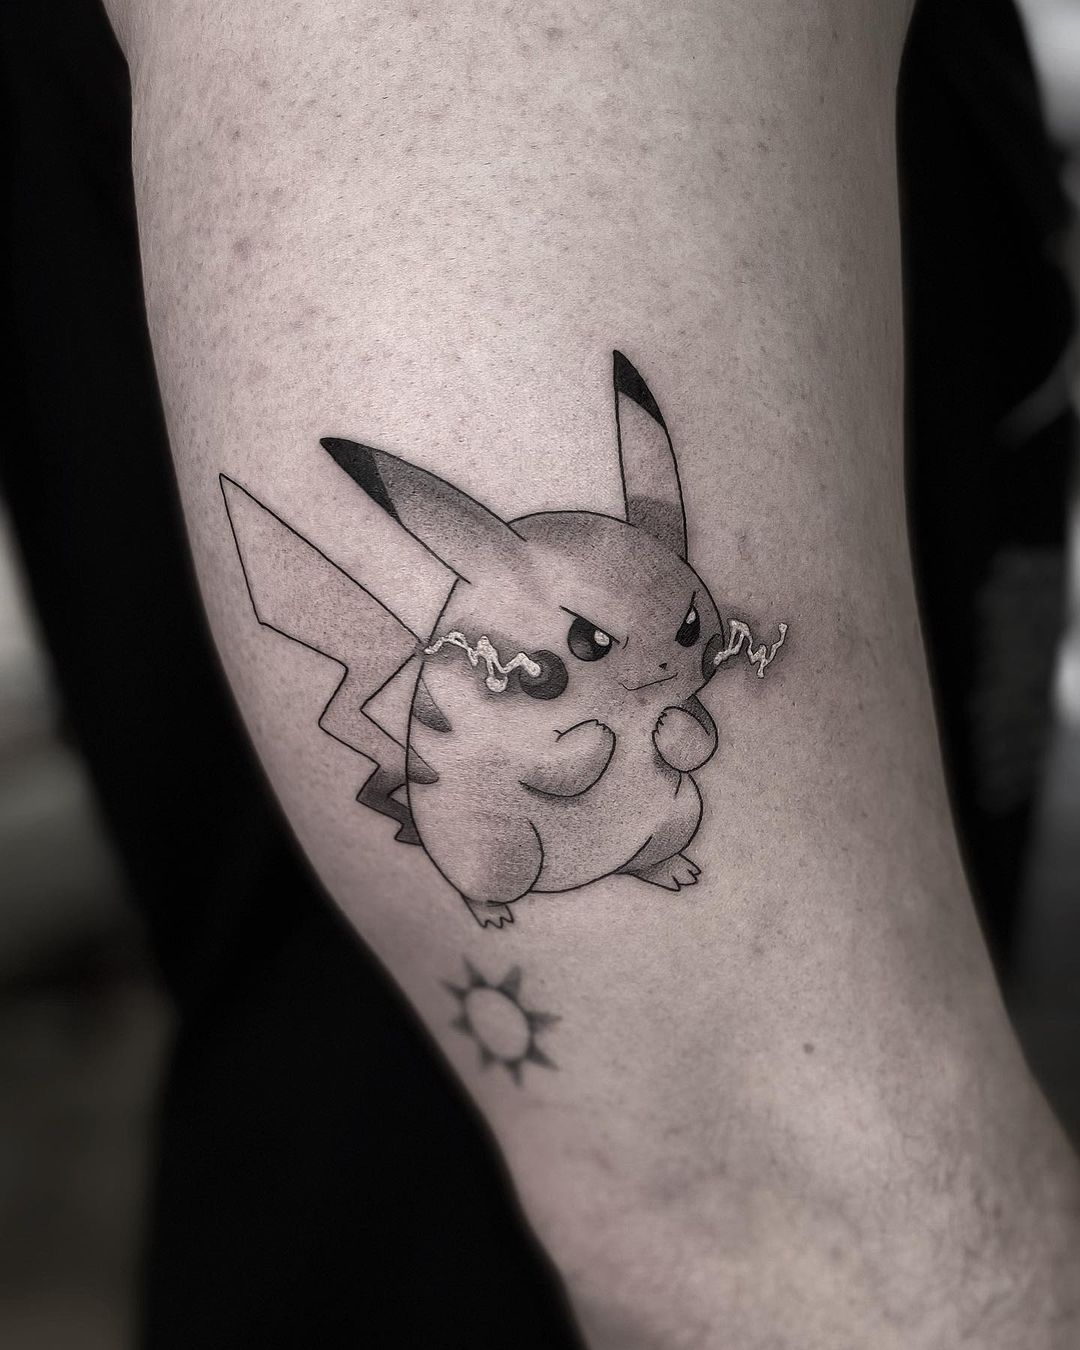 PIkachu tattoo for men by owbonez